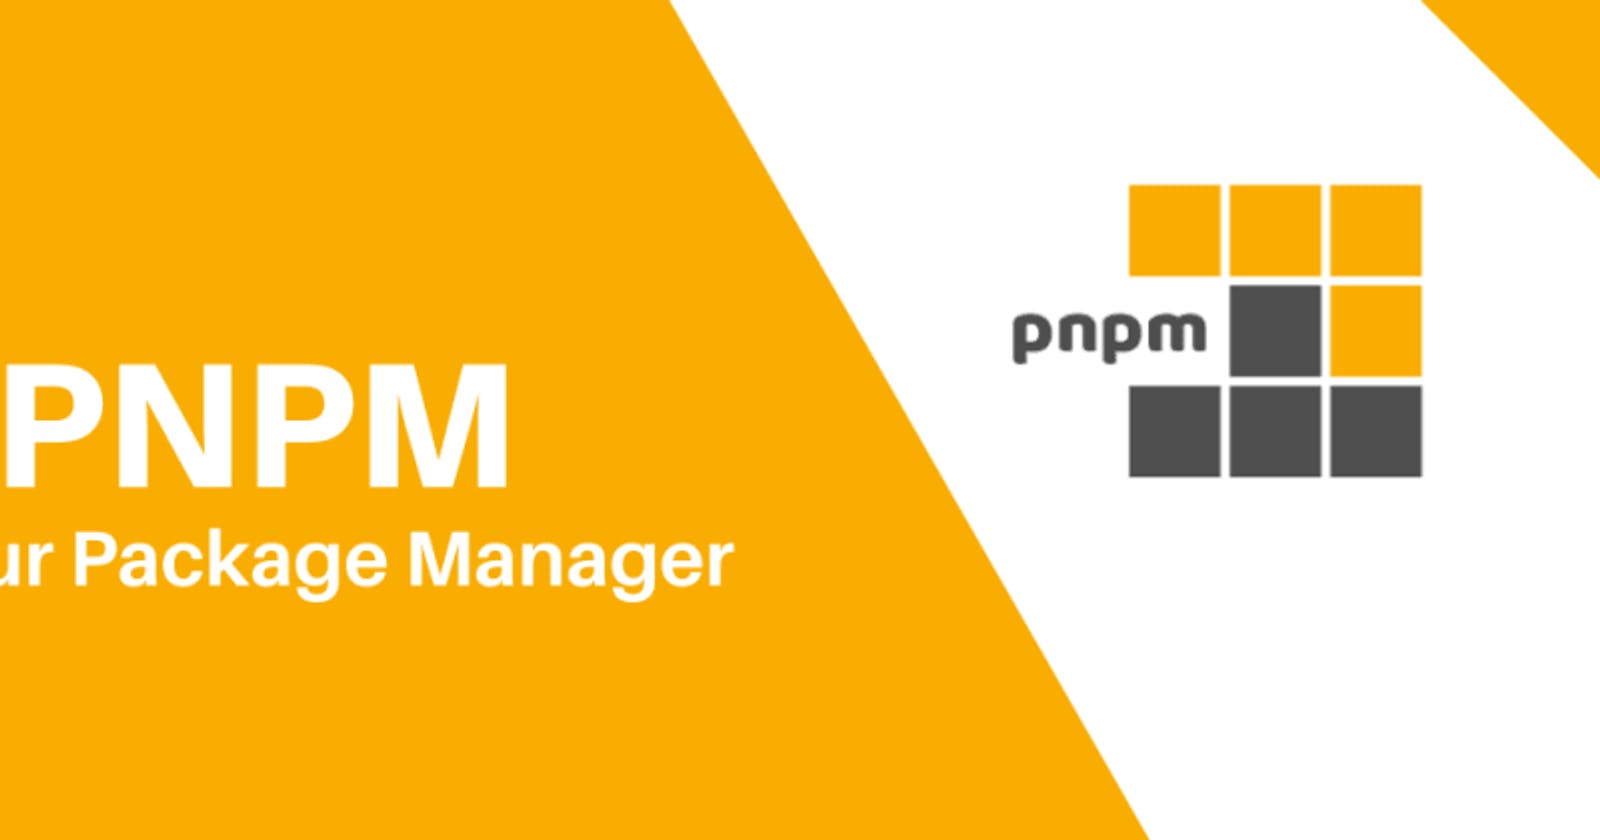 What is PNPM?